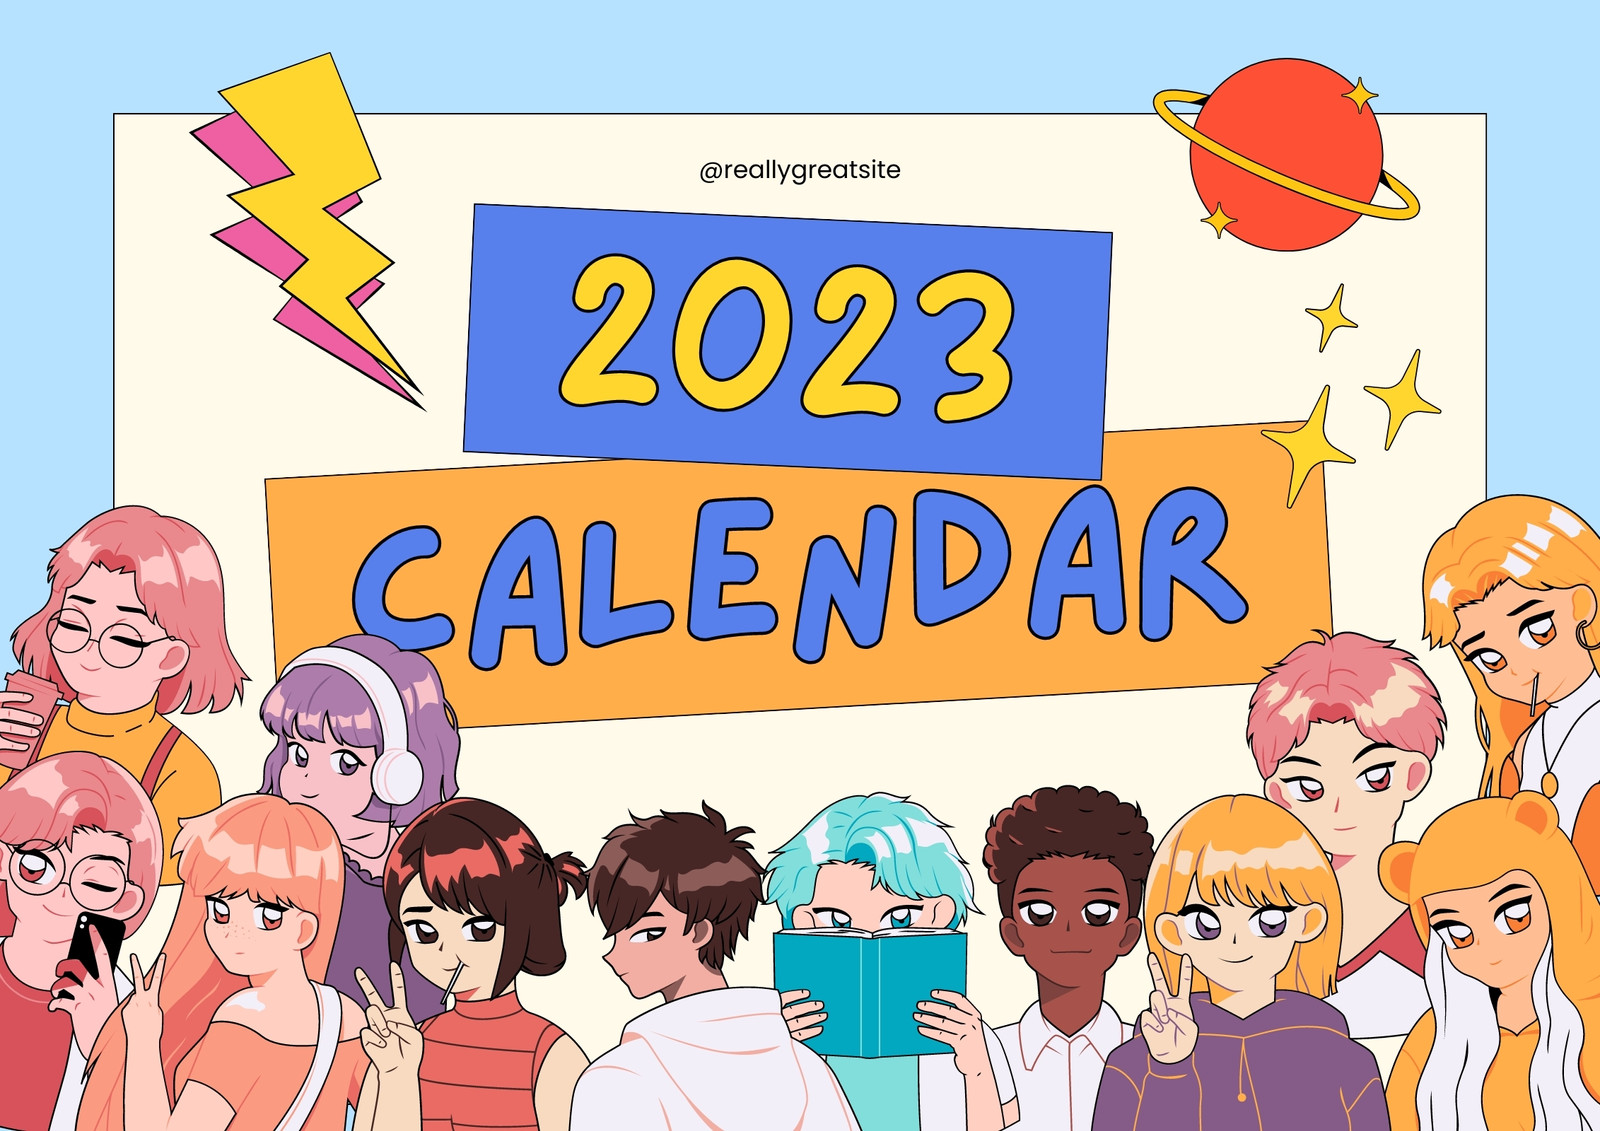 Exclusive ONE PIECE PREMIUM DESK CALENDAR 2023  12 MONTHLY PAGES  FOR  HOME  OFFFICE  2023 TABLE CALENDAR  BEST GIFT FOR ANIMEMANGA LOVERS BY  PURPLEBEES  Amazonin Office Products